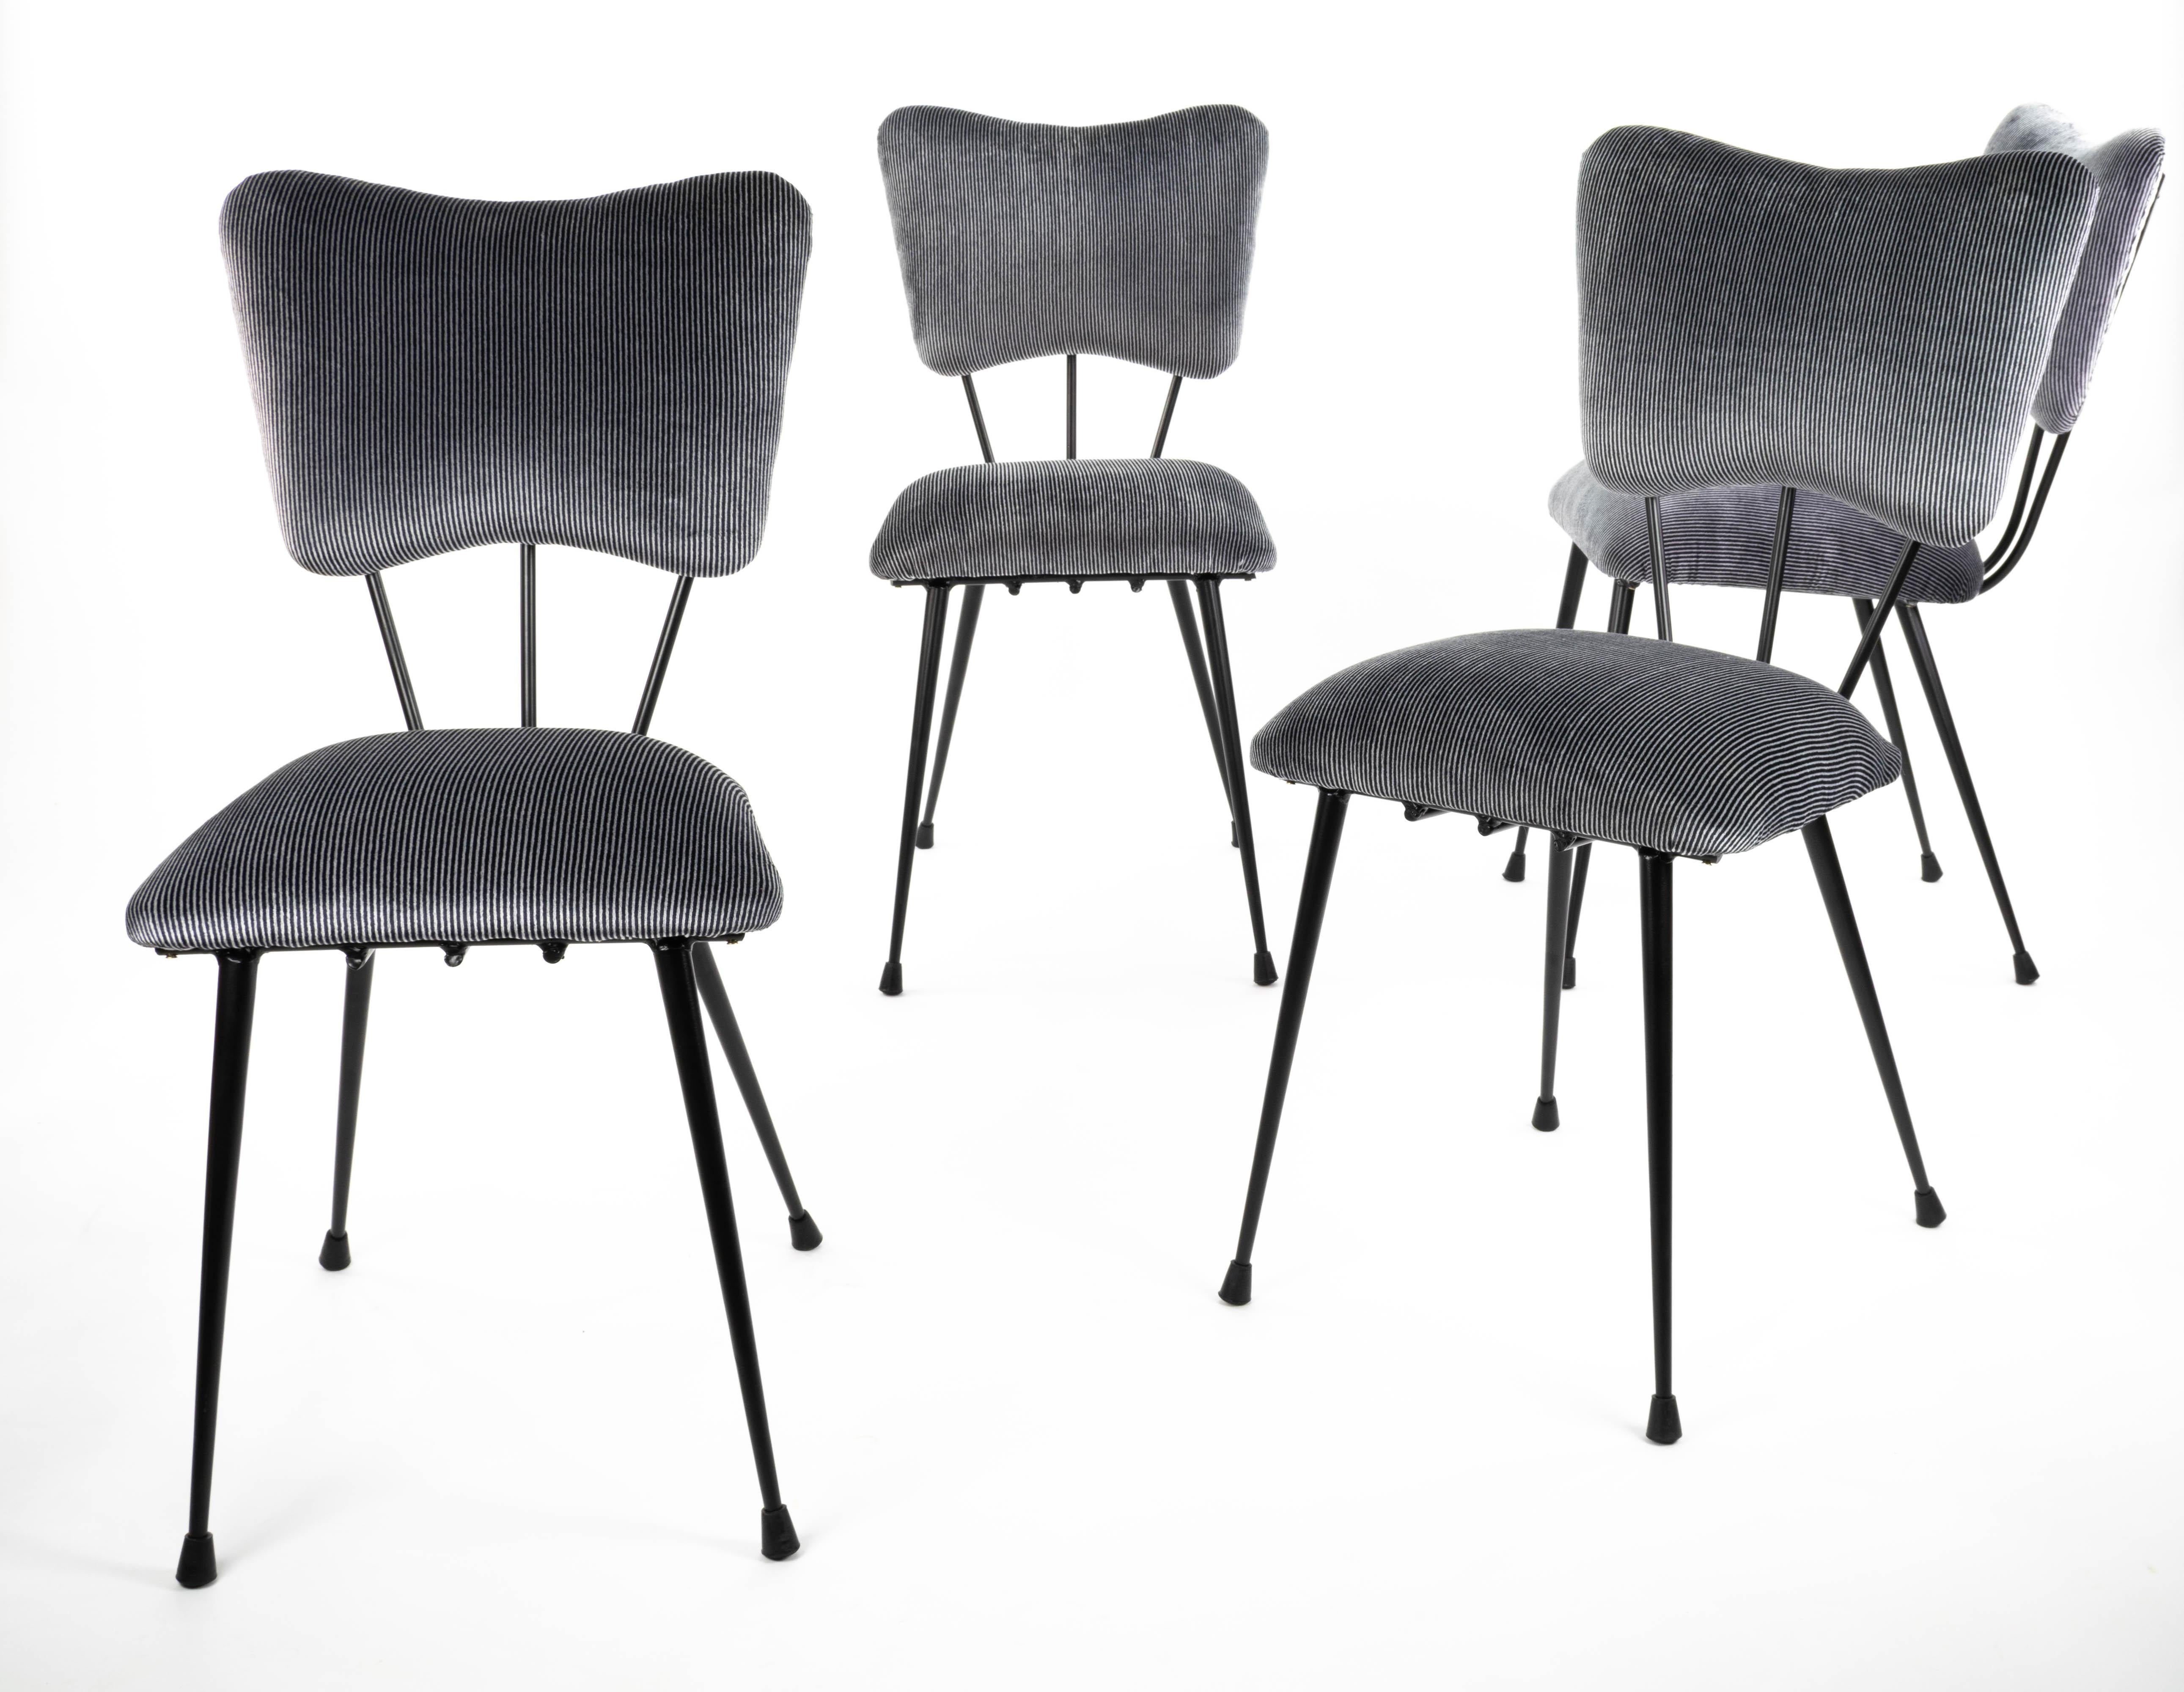 Midcentury French Chairs in Black Lacquered Steel and Striped Upholstery, 1950s 1